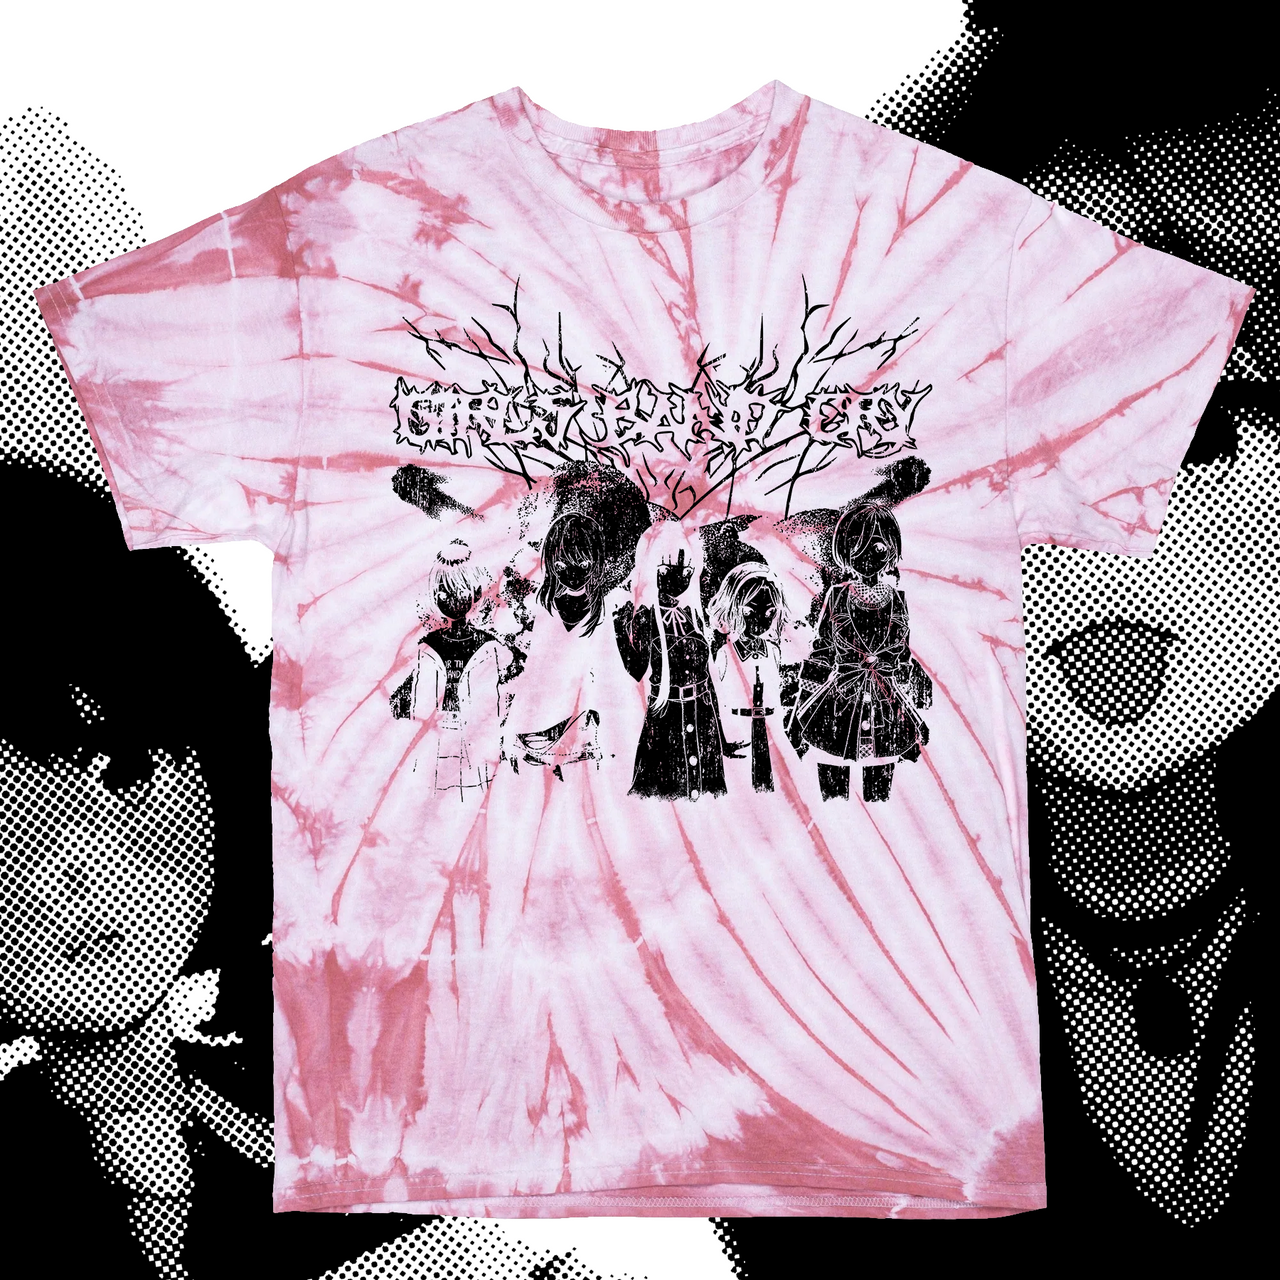 'GIRLS BAND CRY' PINK TIE DYE T-SHIRT